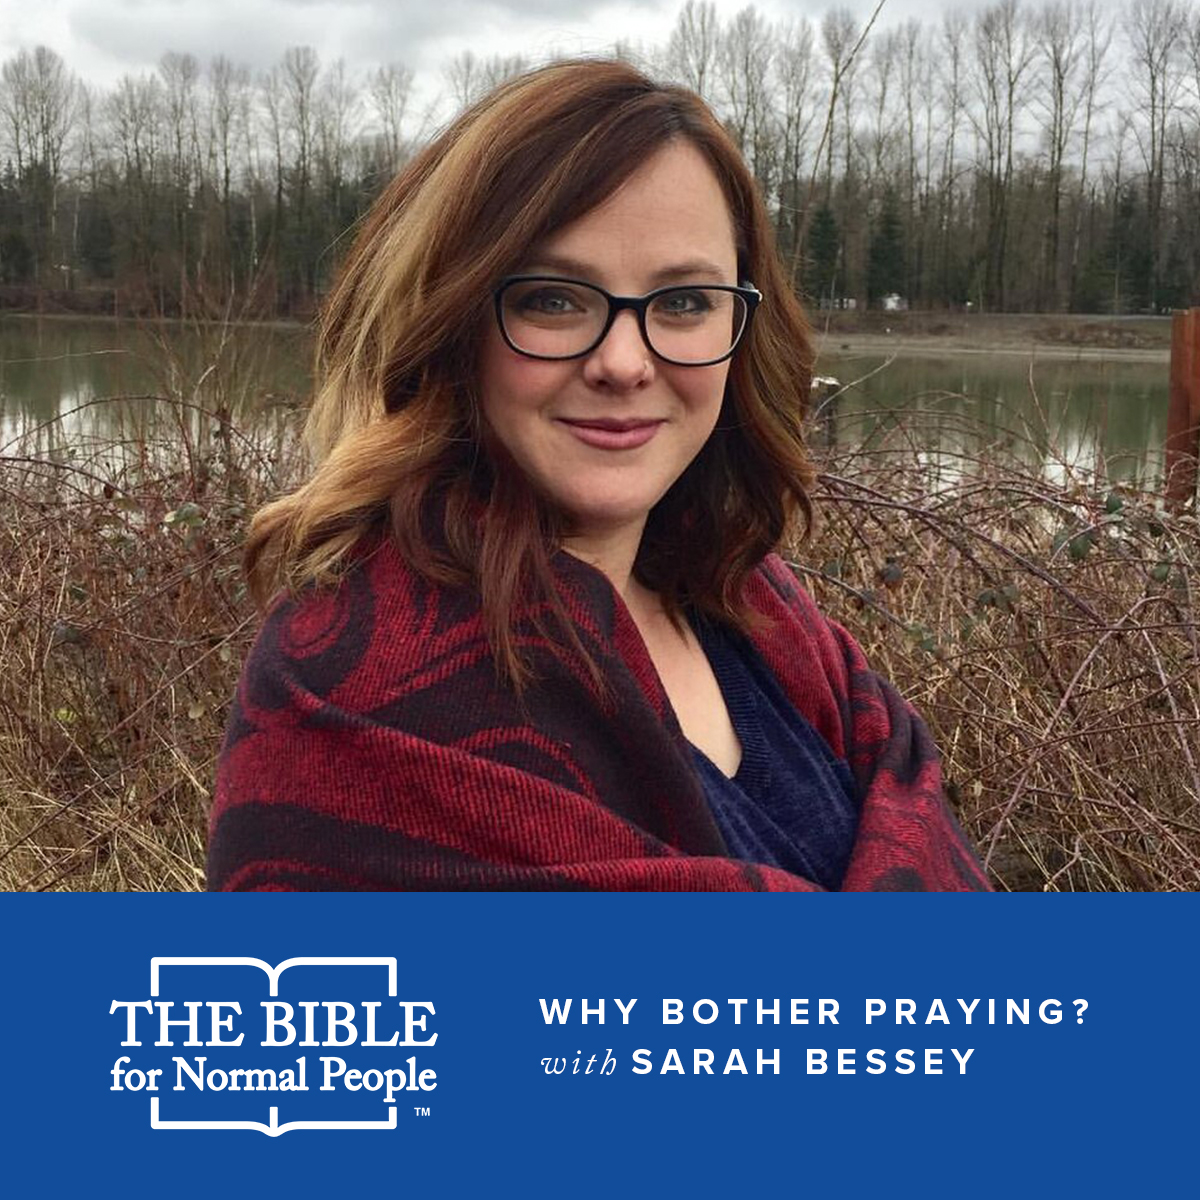 Interview with Sarah Bessey: Why Bother Praying?